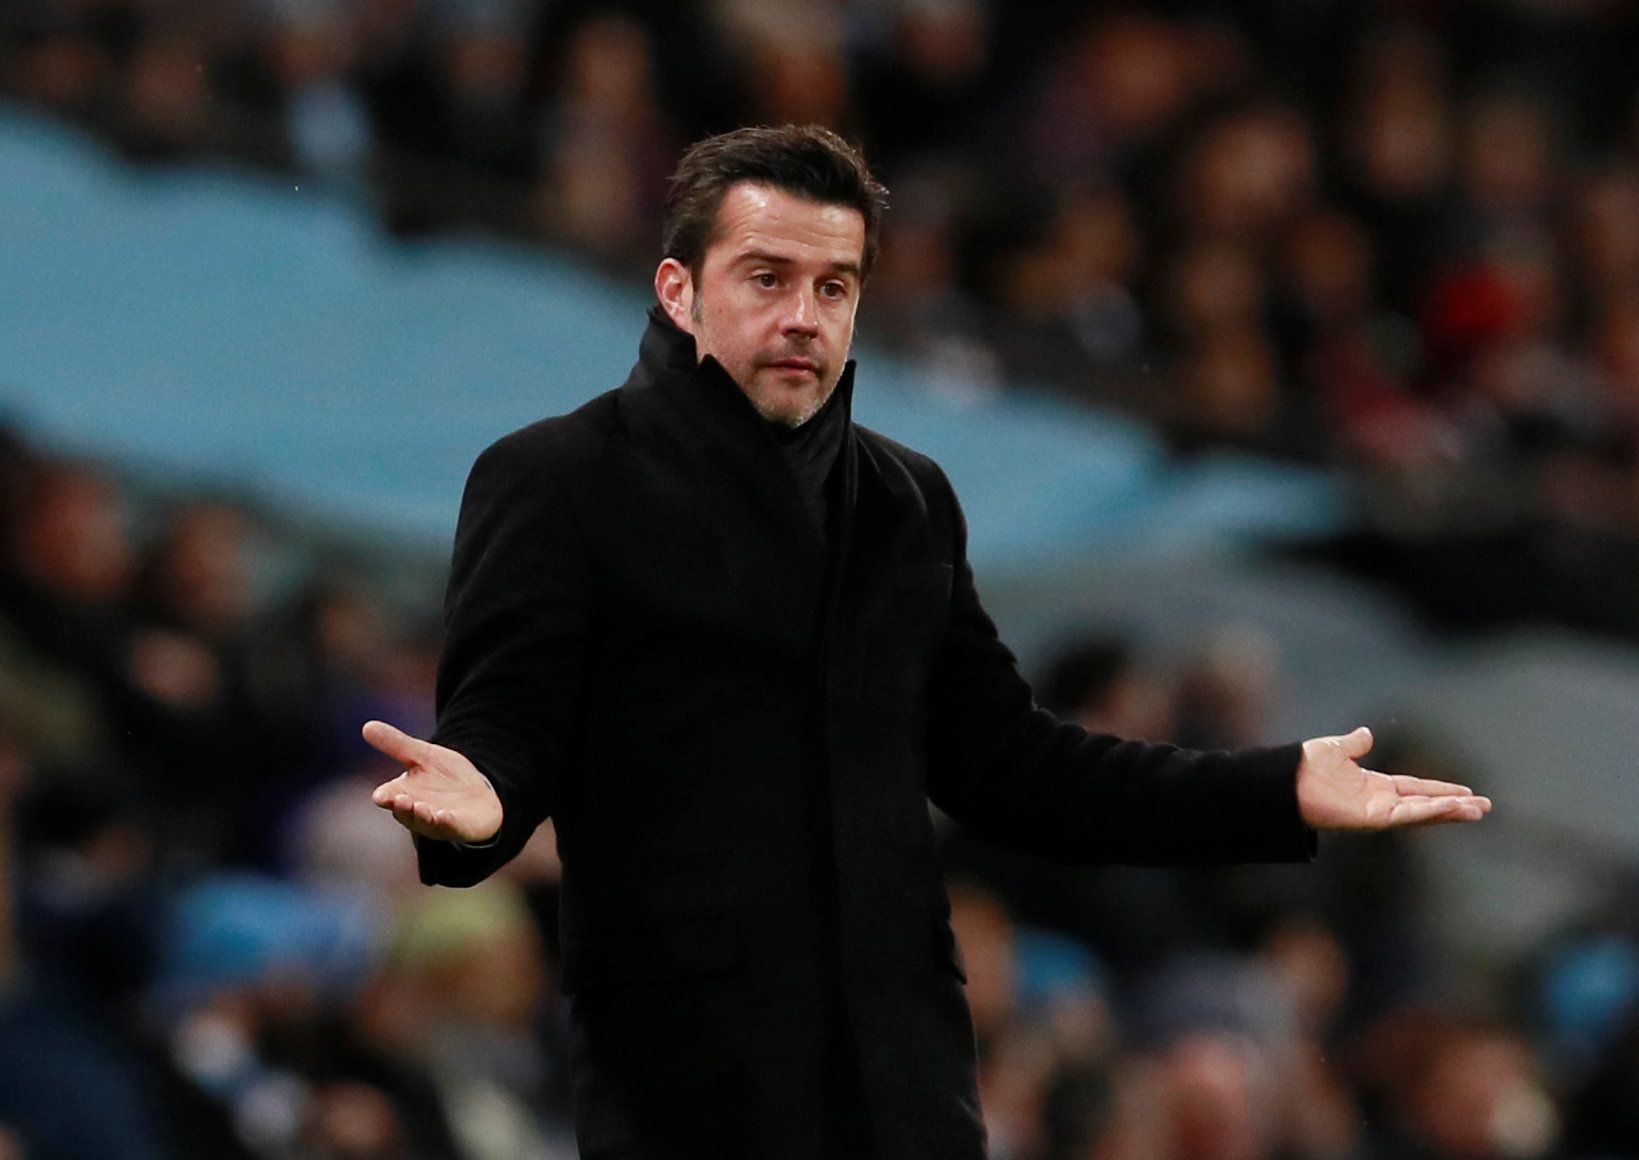 Soccer Football - Premier League - Manchester City vs Watford - Etihad Stadium, Manchester, Britain - January 2, 2018   Watford manager Marco Silva     Action Images via Reuters/Jason Cairnduff    EDITORIAL USE ONLY. No use with unauthorized audio, video, data, fixture lists, club/league logos or 